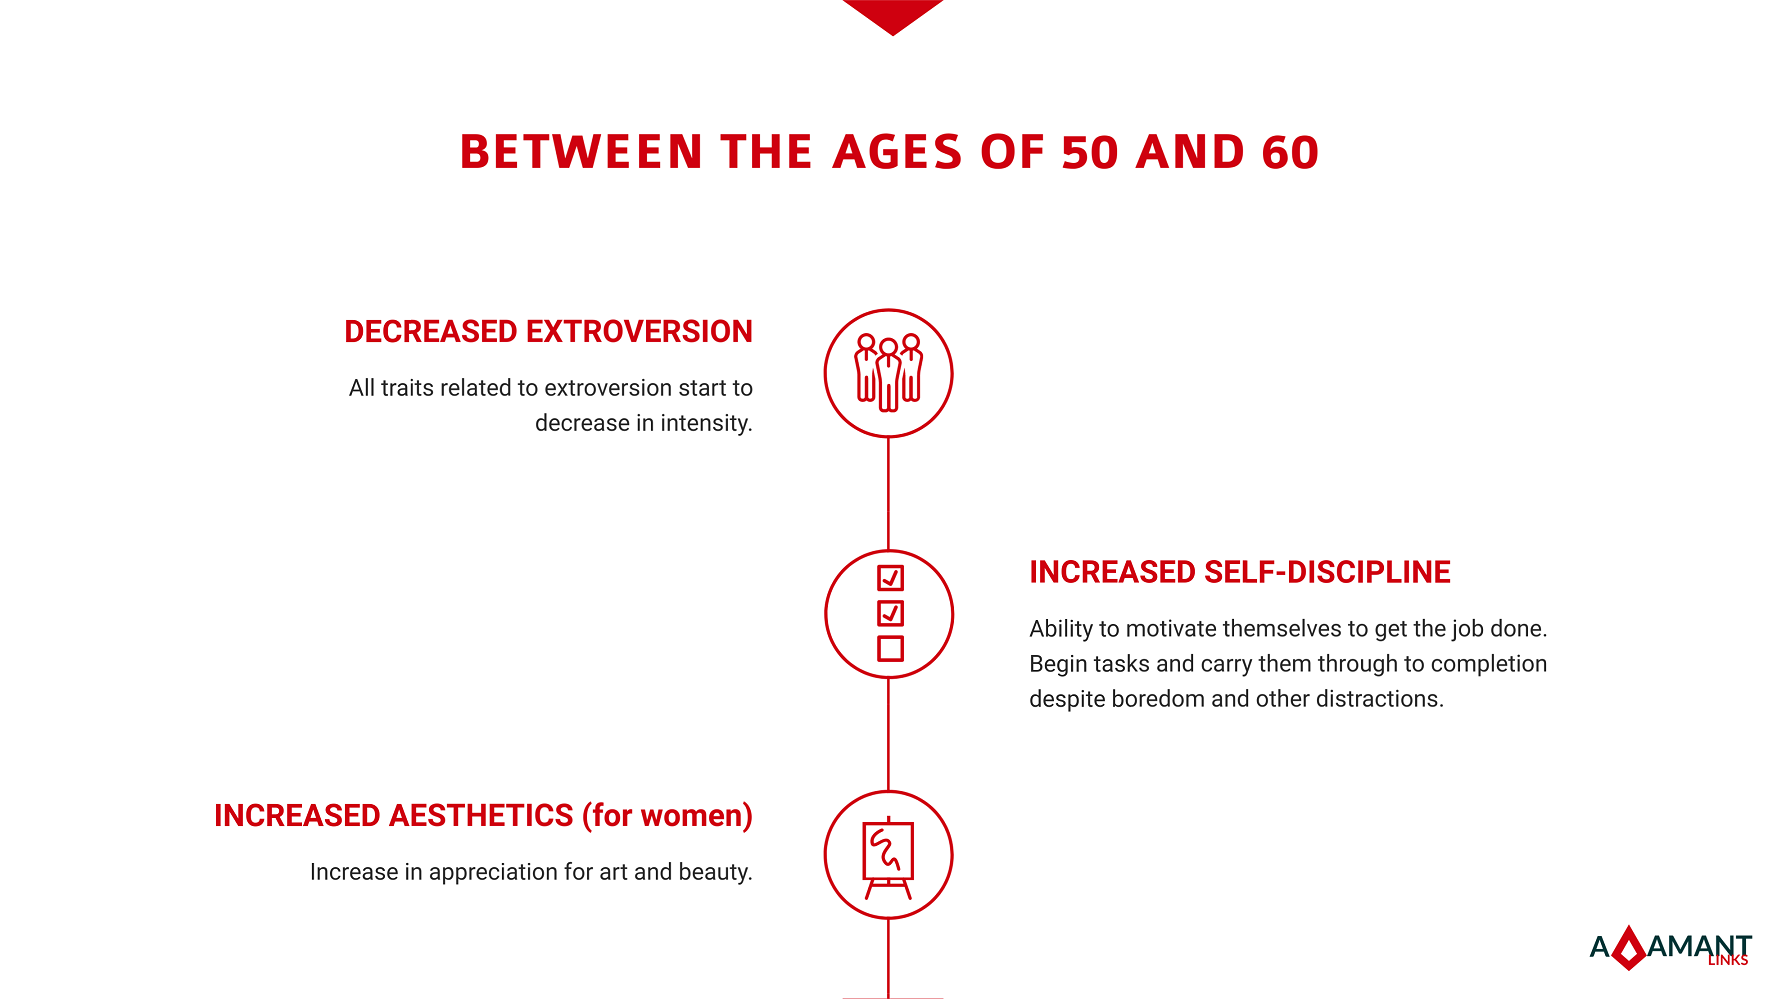 Adamant Links - Psychographics between the ages of 50 and 60